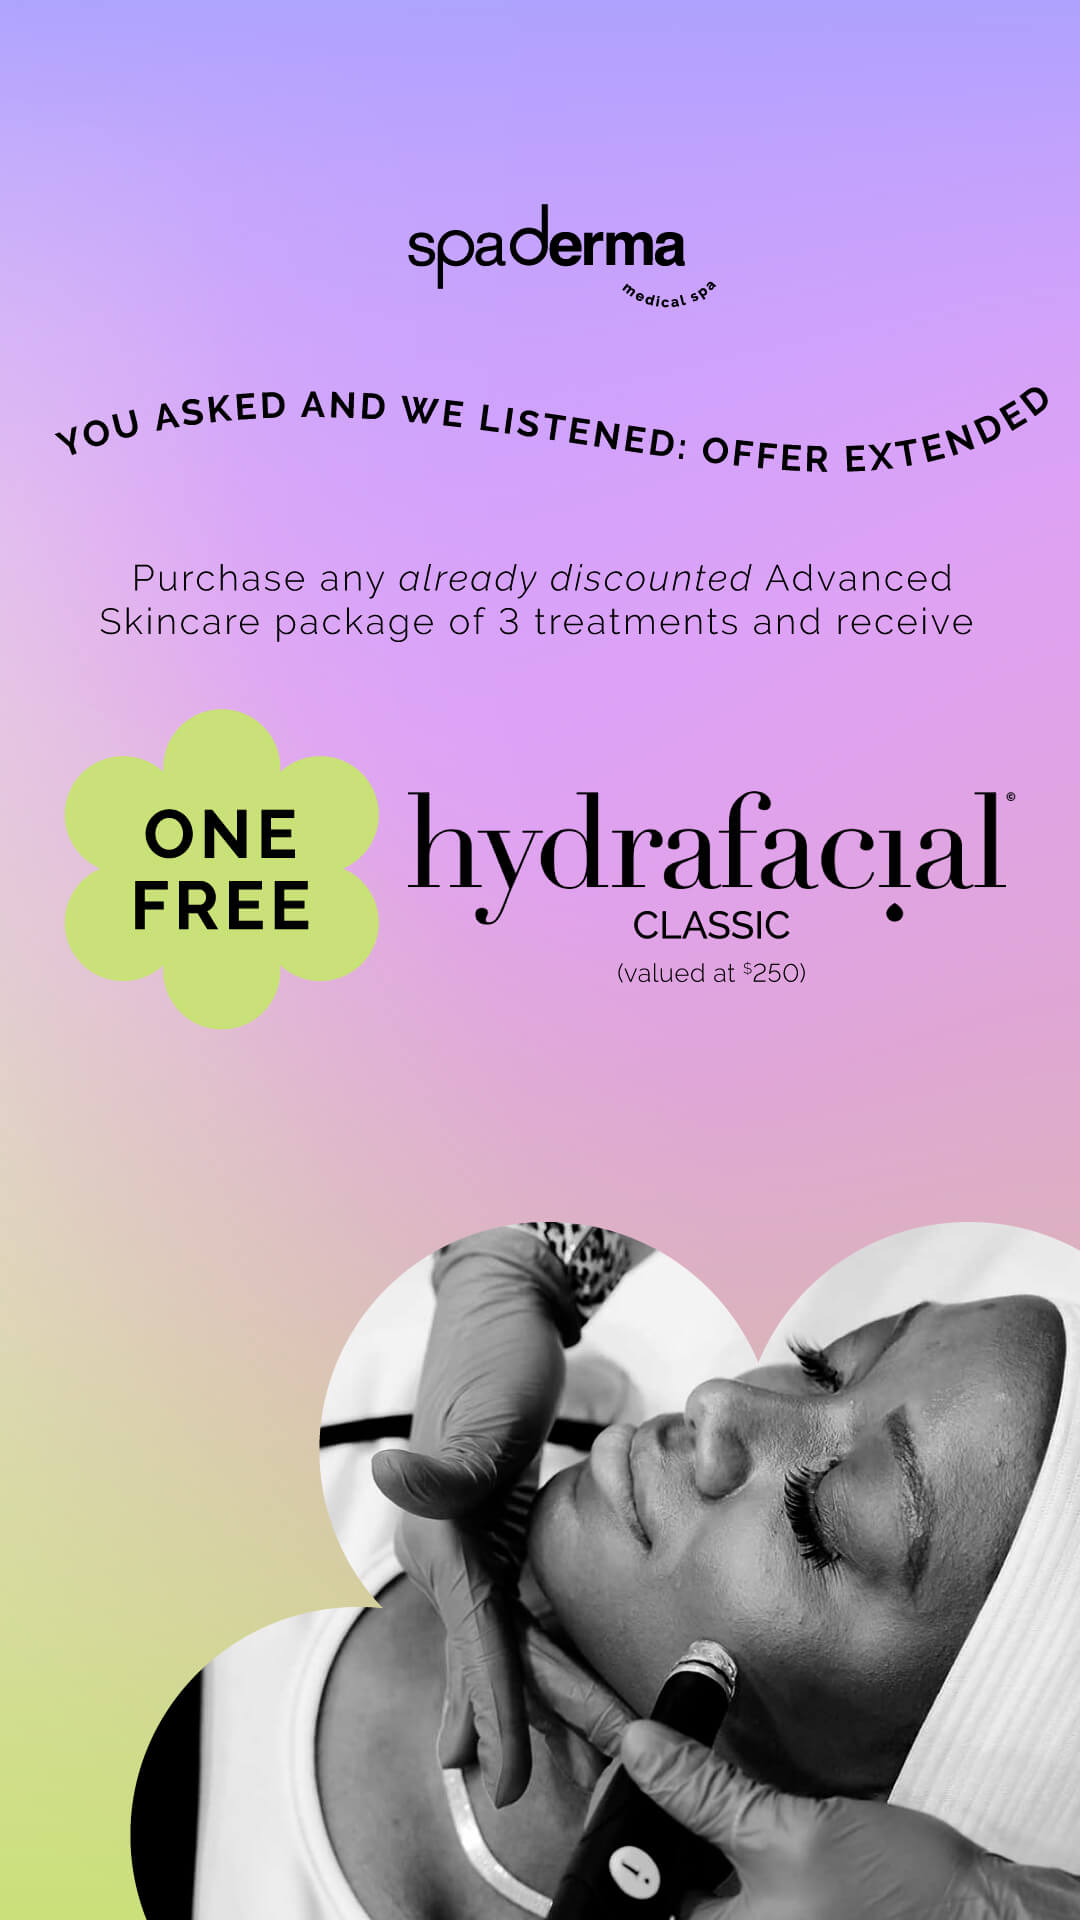 April promotions are here! Receive a FREE Hydrafacial with the purchase of an advanced skincare package of 3 sessions!